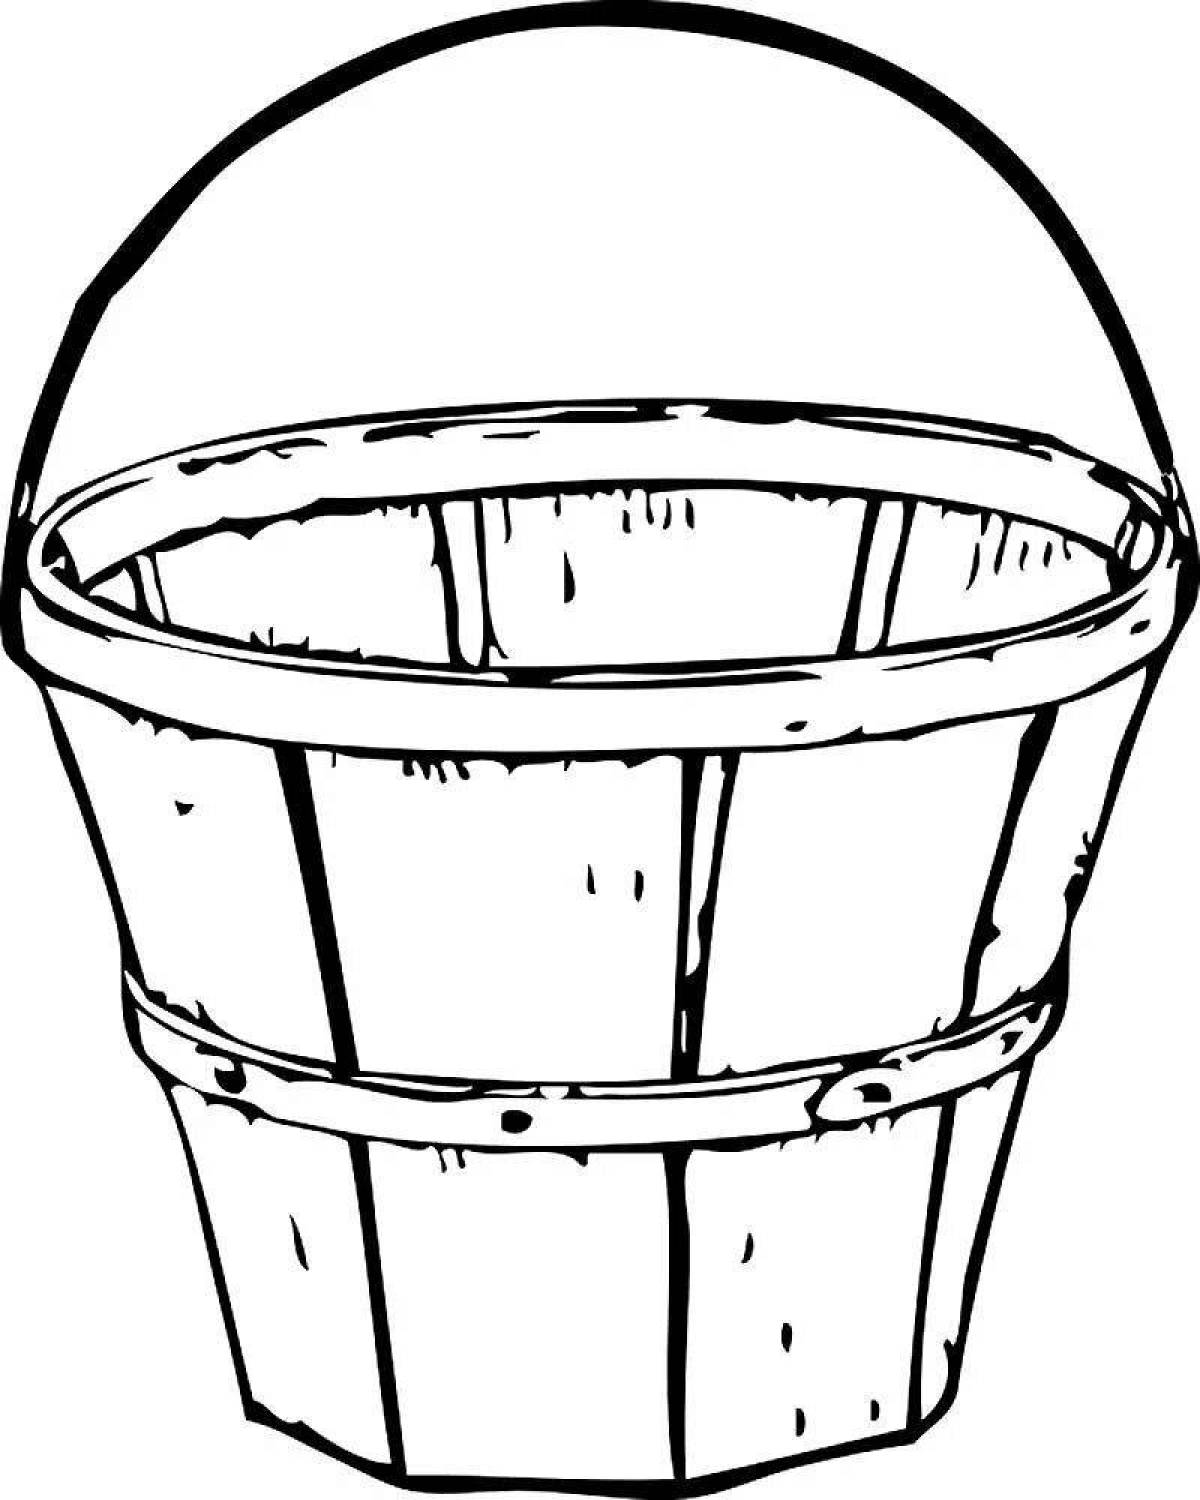 Living bucket coloring page for youth